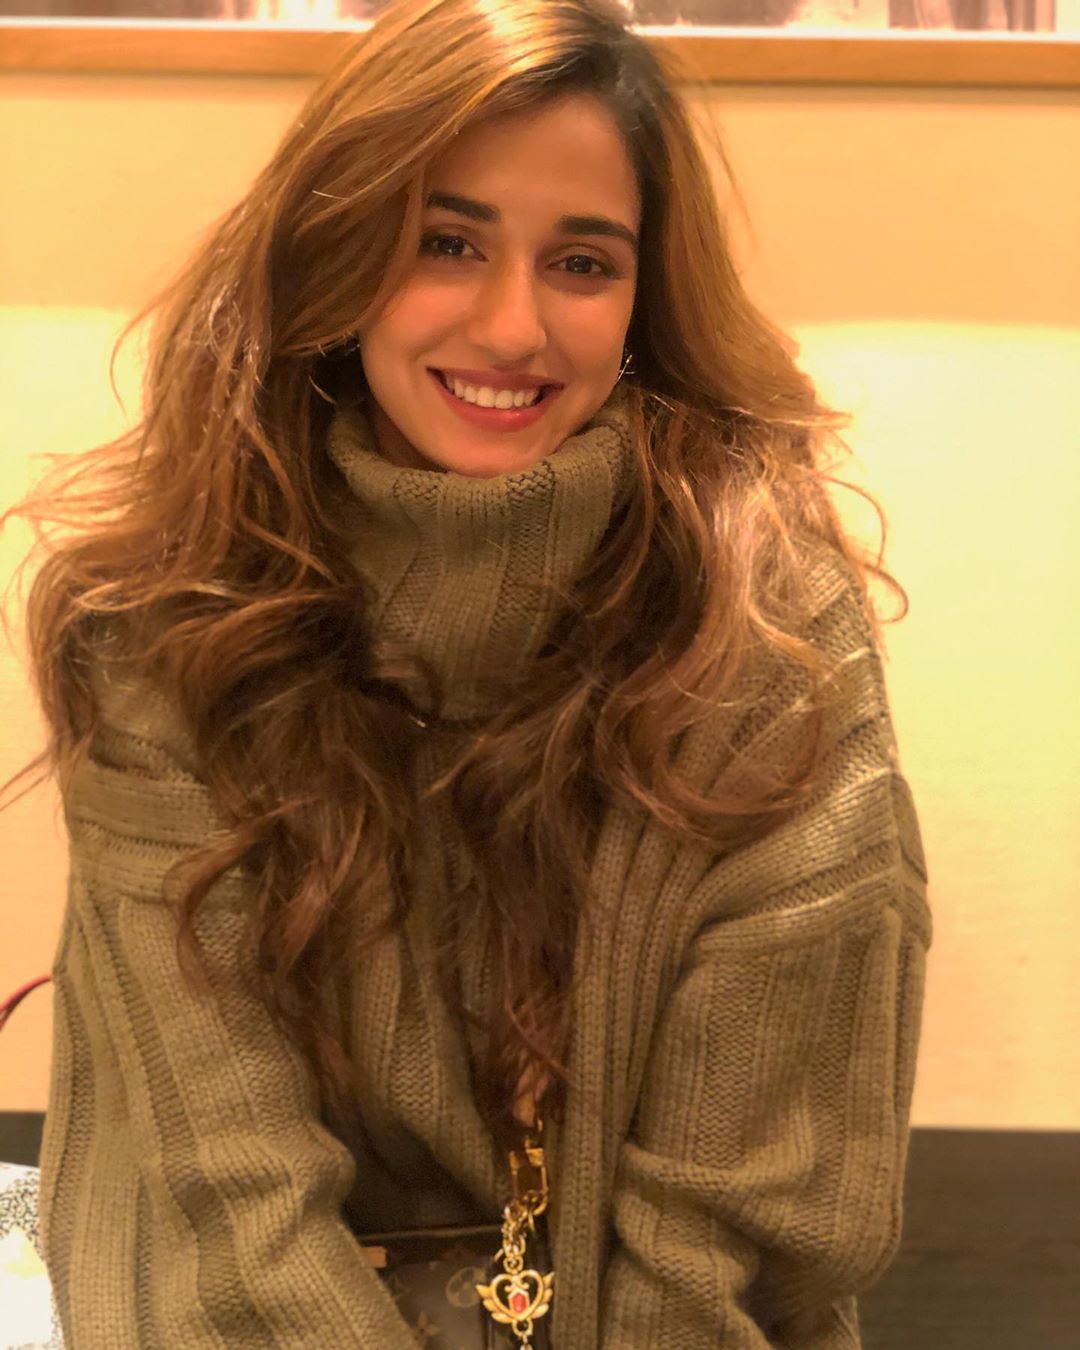 EXCLUSIVE: Disha Patani On Nepotism Feels Star Kids Have Expectations To Meet, Outsiders Don't Have That Baggage 